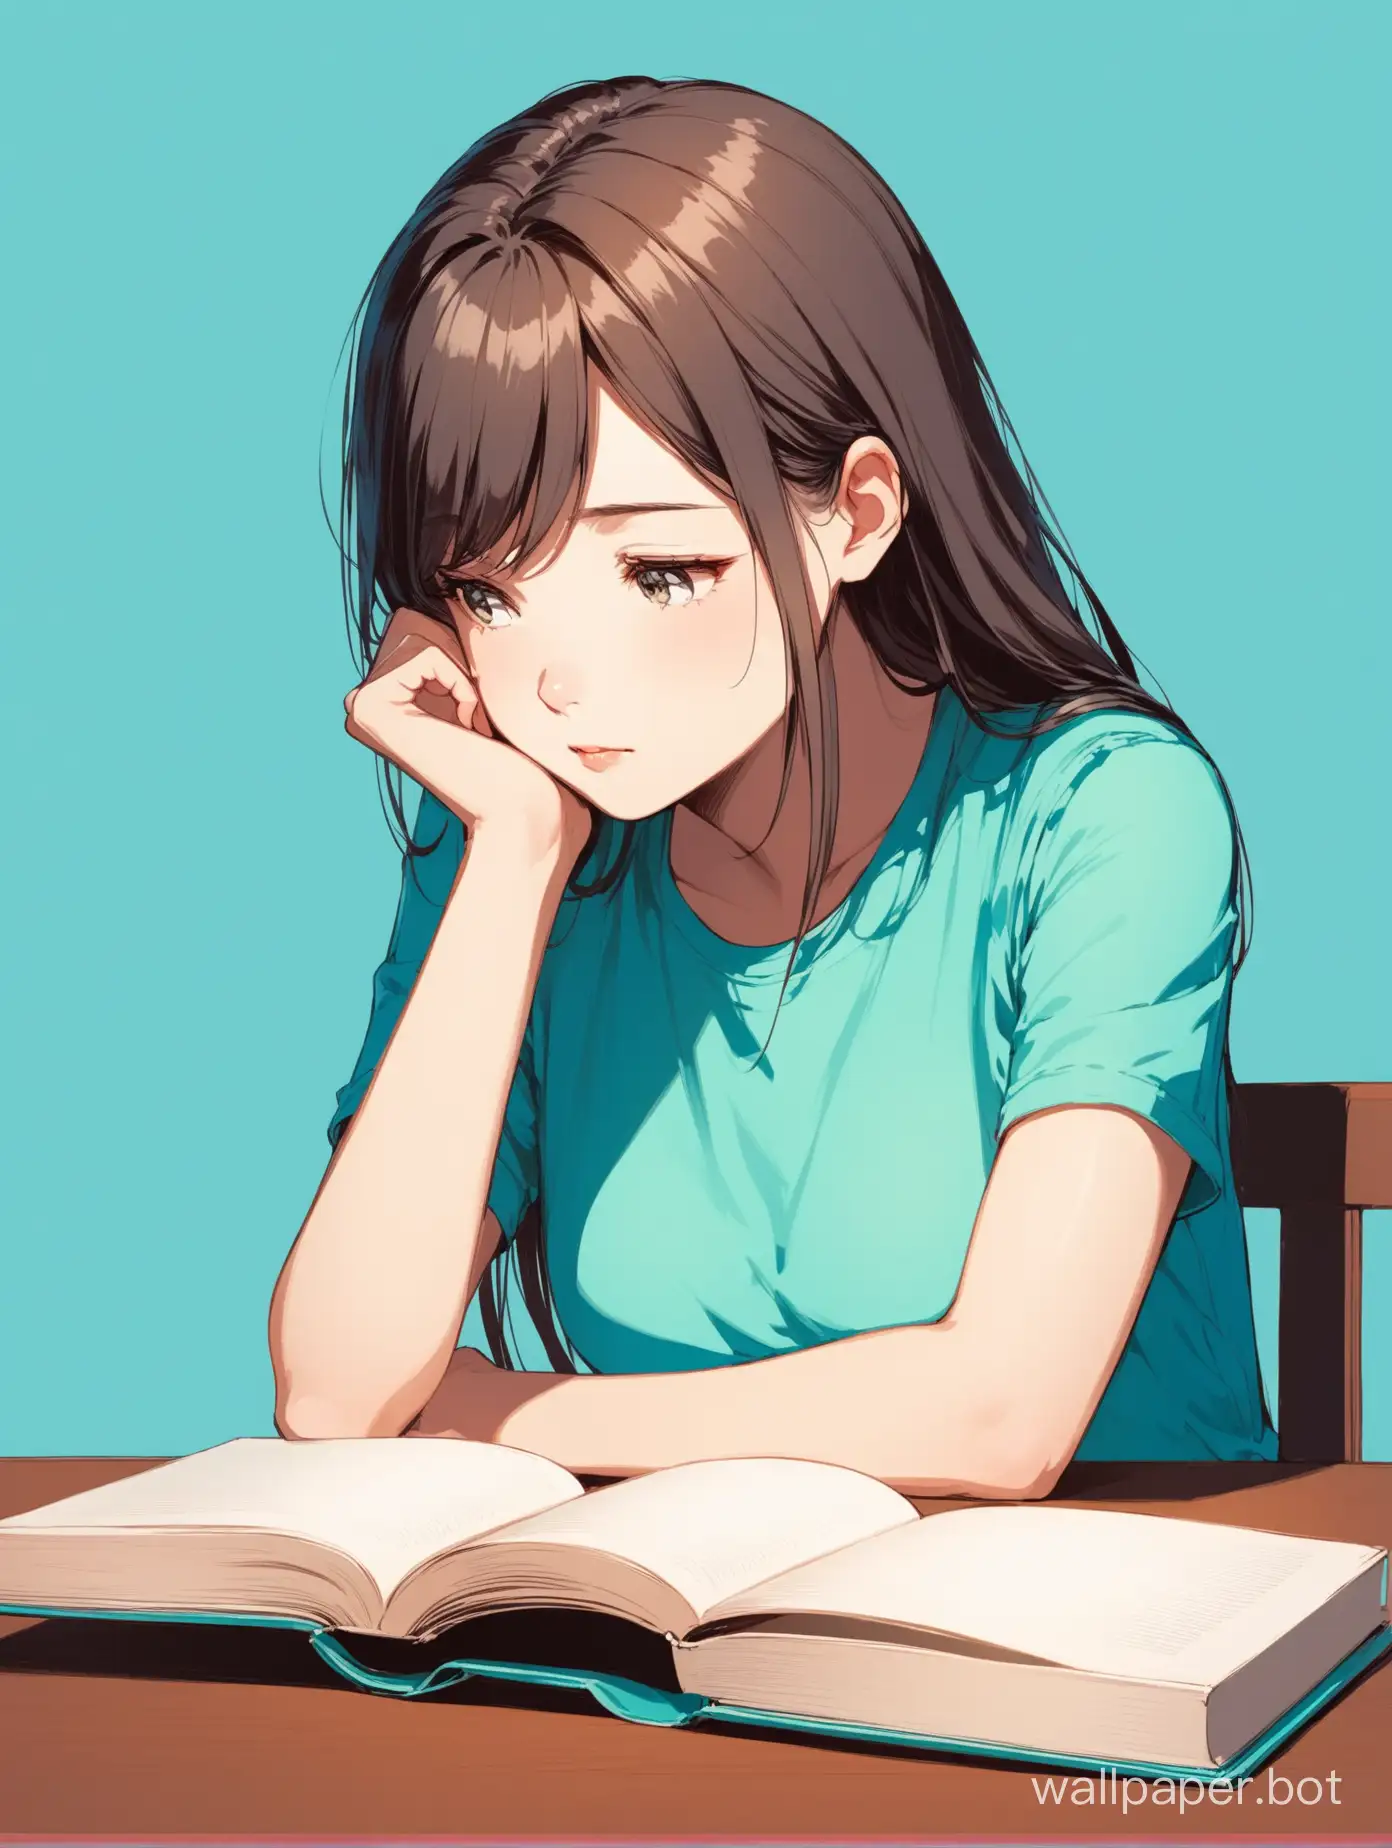 The girl sits at the table, with a book, thinking, light blue background.